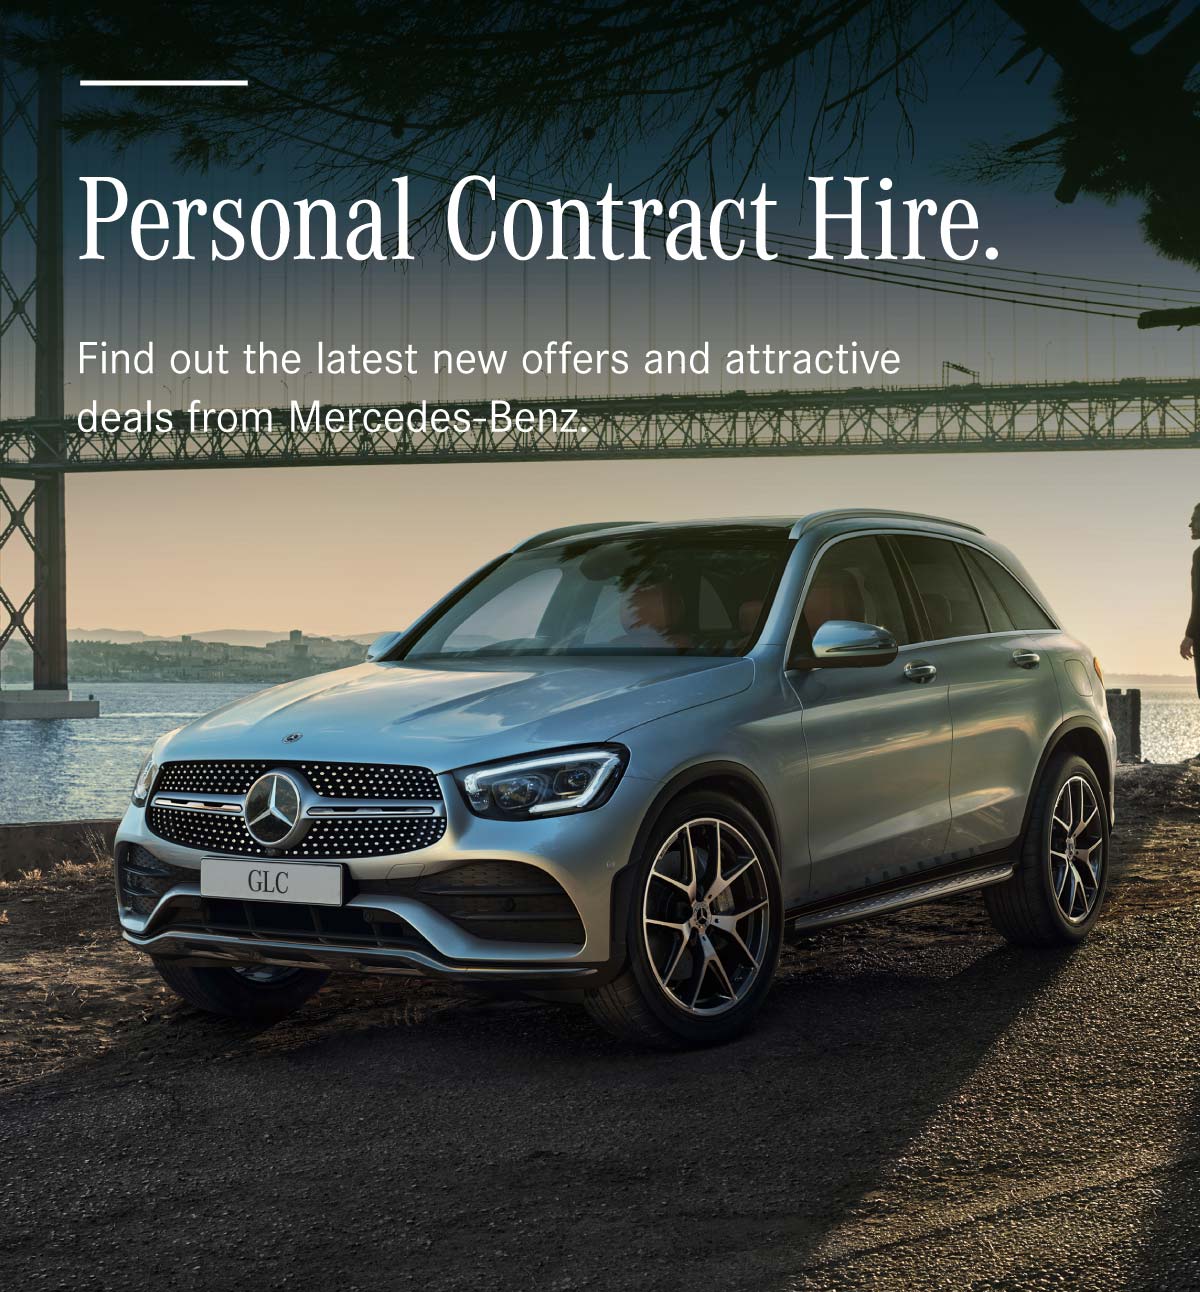 Mercedes Personal Contract Hire